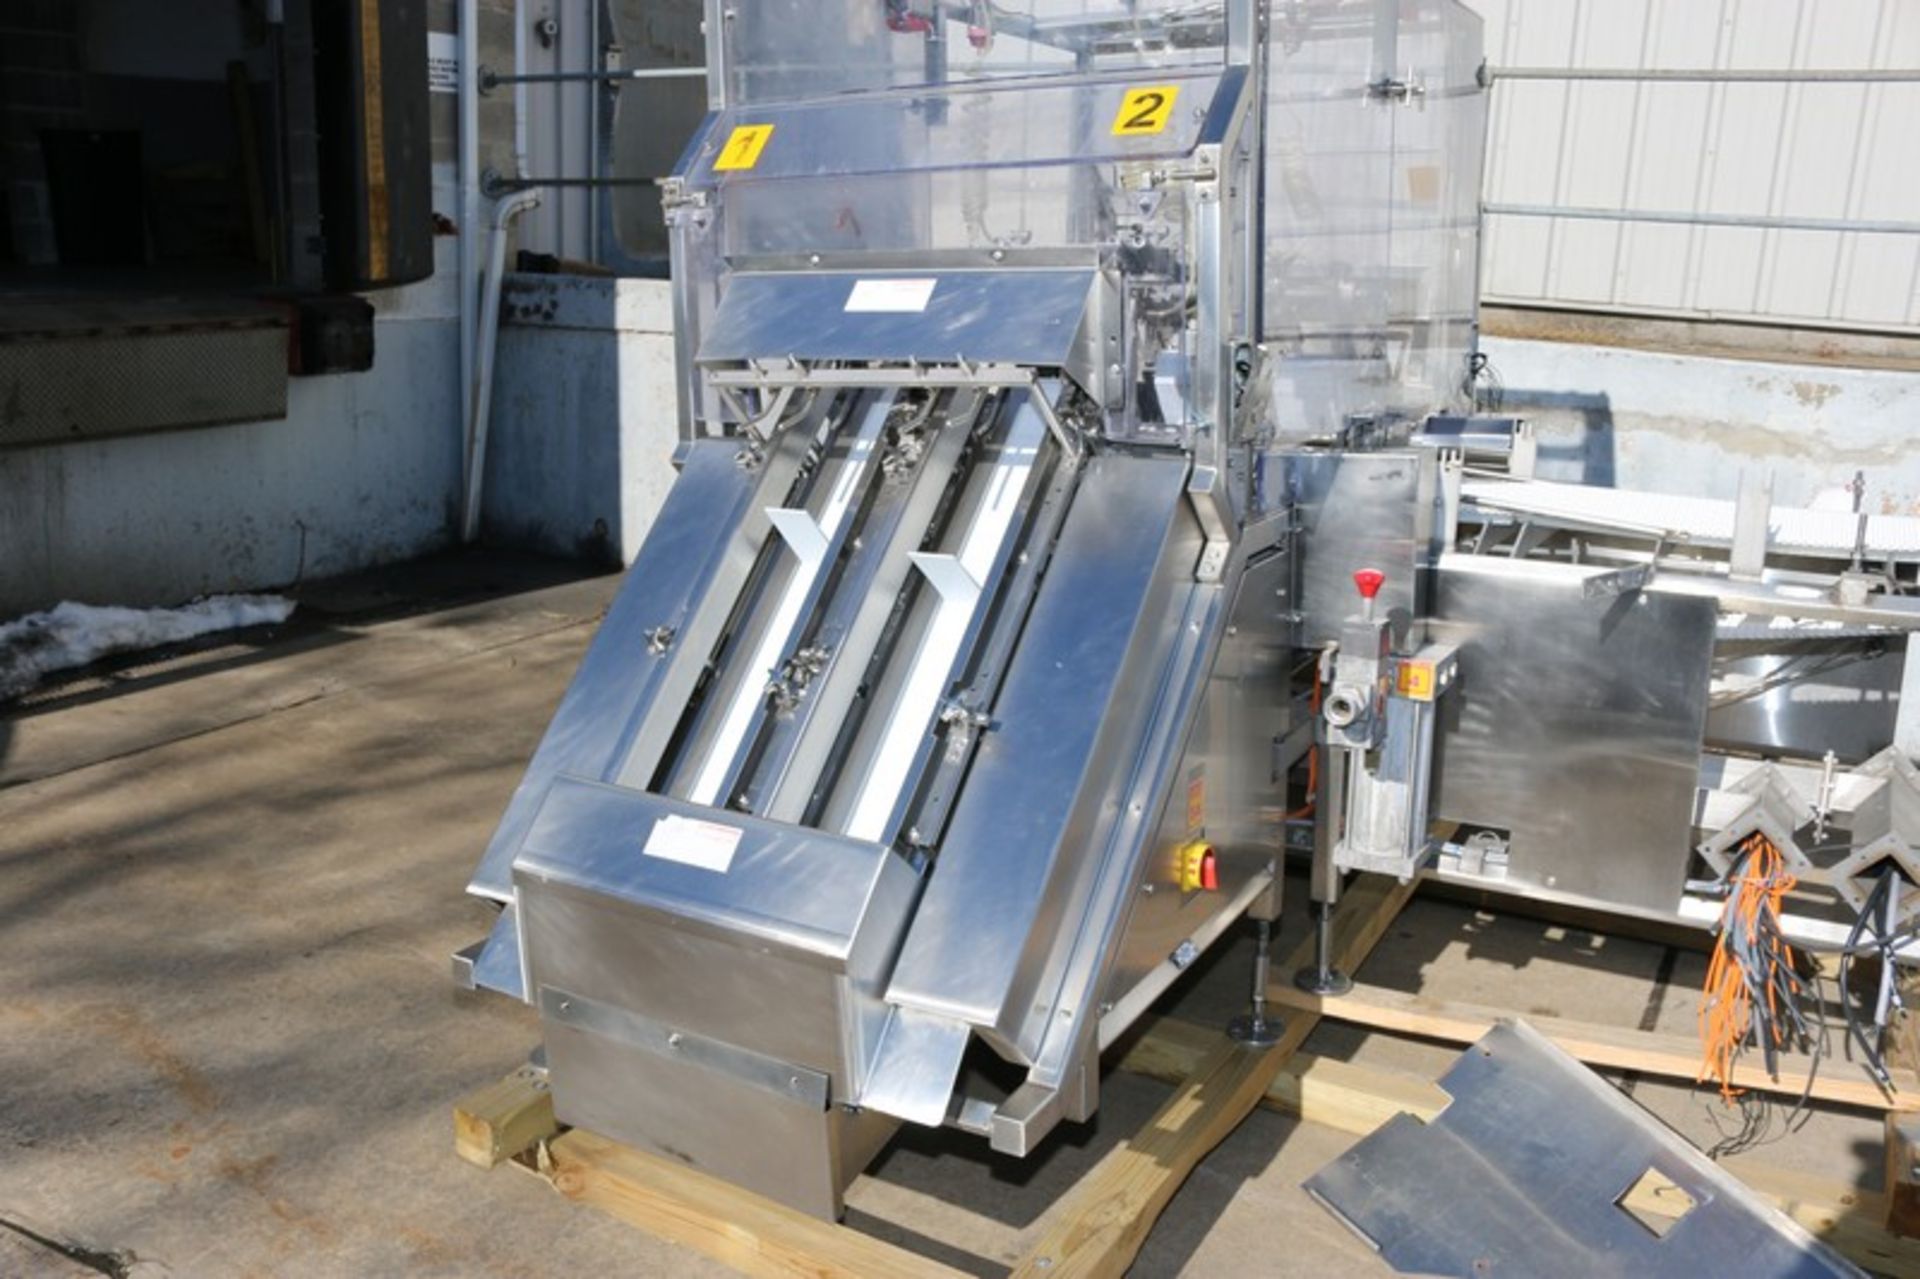 Raque S/S Tray Dispenser,2-Lanes of Aprox. 8" W Outfeed Conveyor, with 4-Head Pick N' Place Vacuum - Image 3 of 11